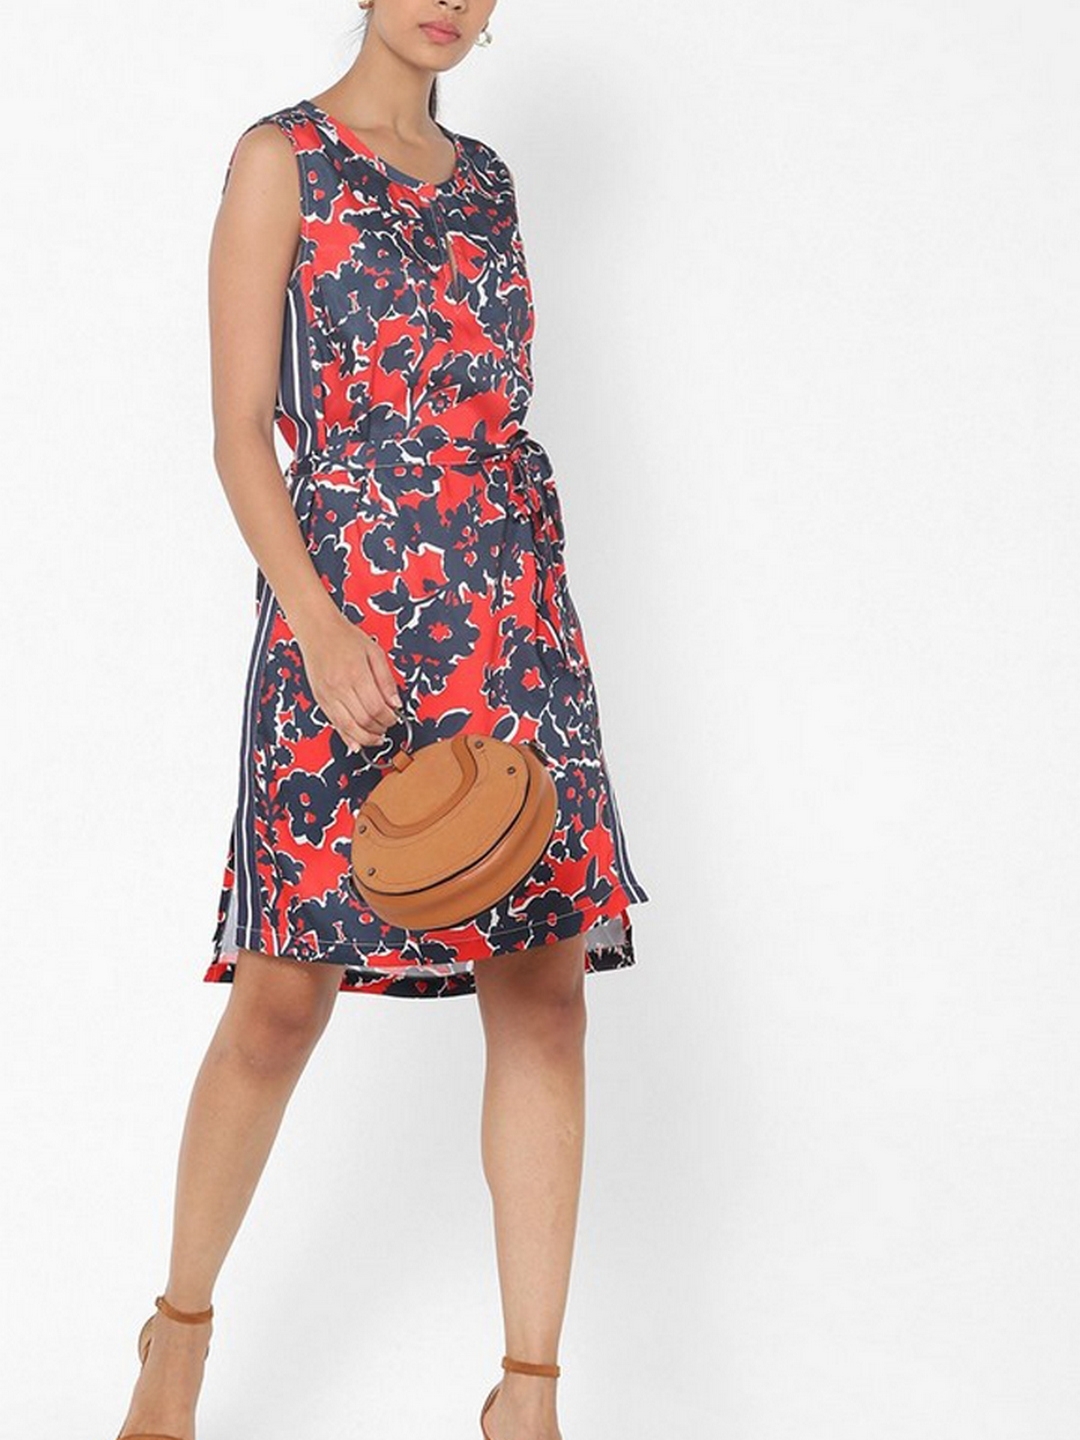 Floral Print Dress with Waist Tie-Up